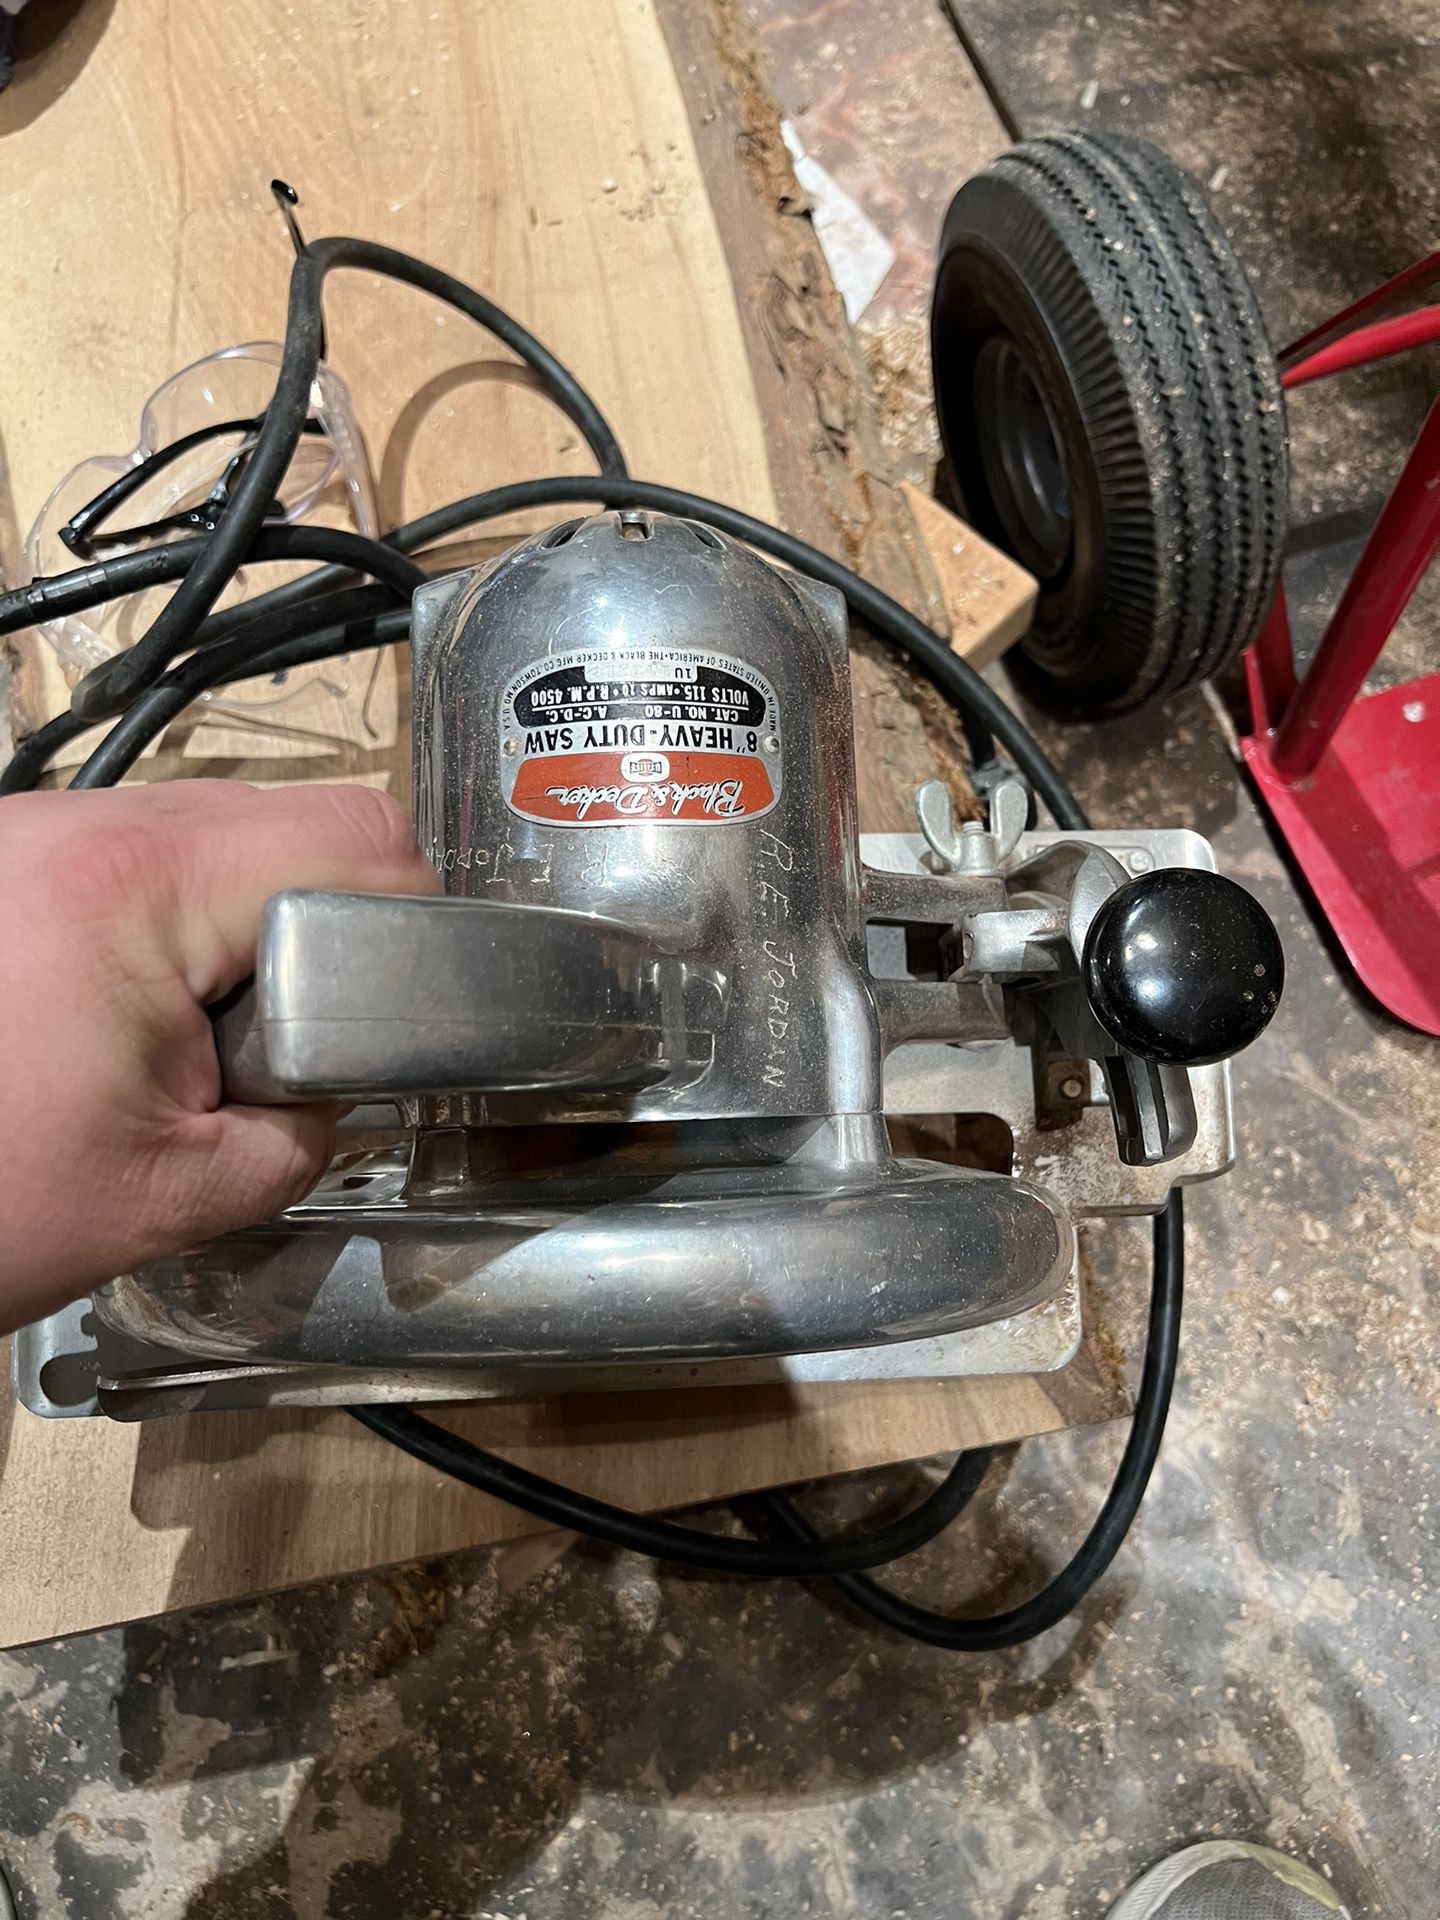 This black and decker circular saw from the 80's still runs like a